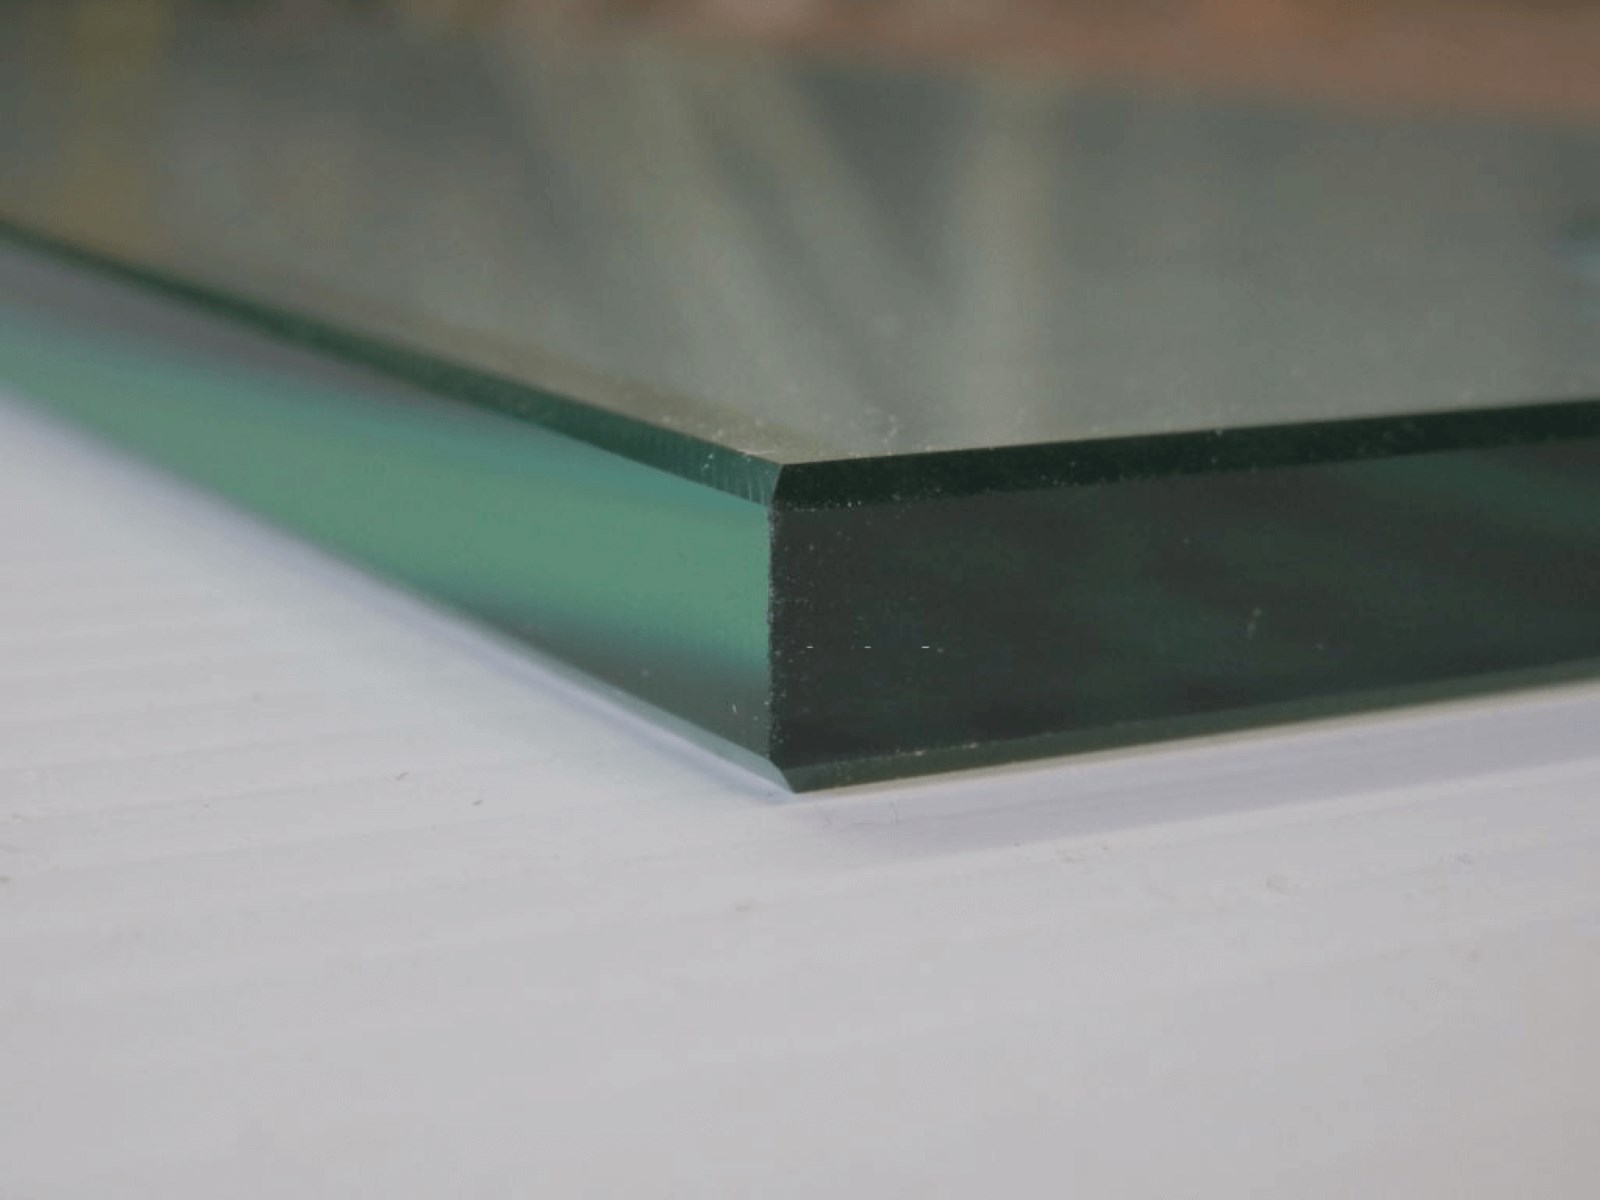 How Can You Tell If Glass Is Tempered